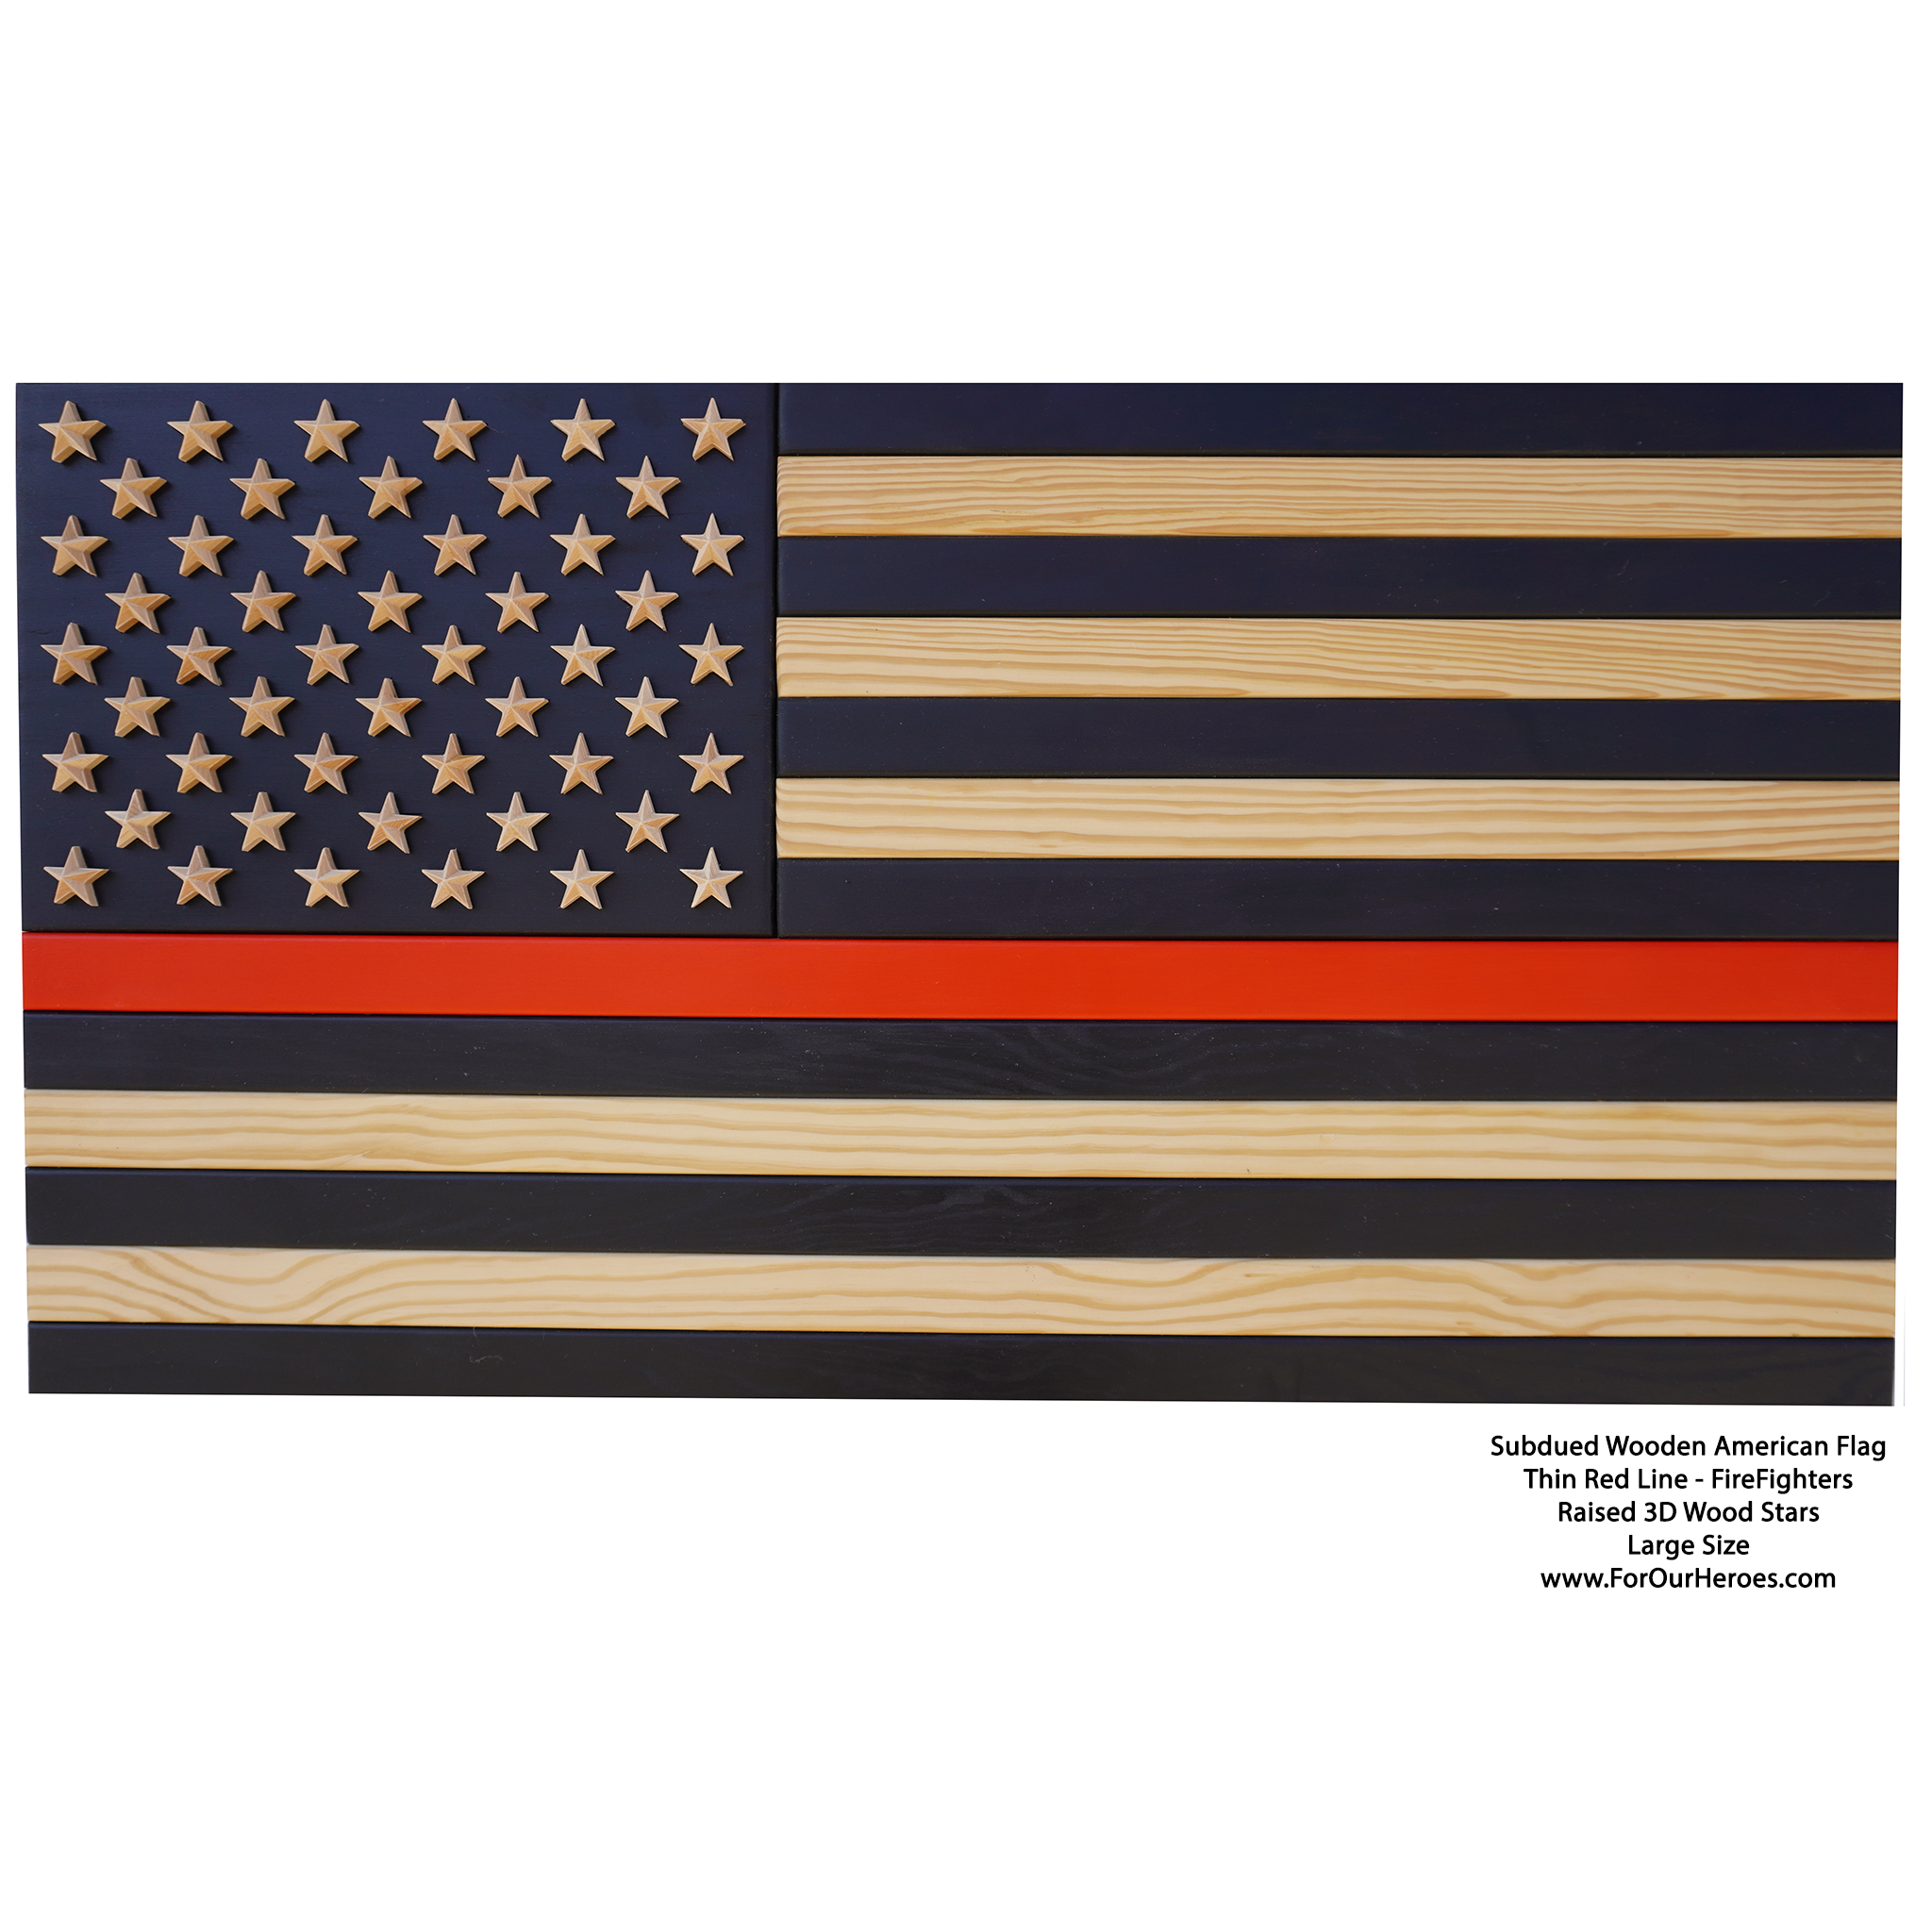 2D TRADITIONAL SUBDUED THIN LINE American Flag (TRUE 3D Raised Stars) - 0